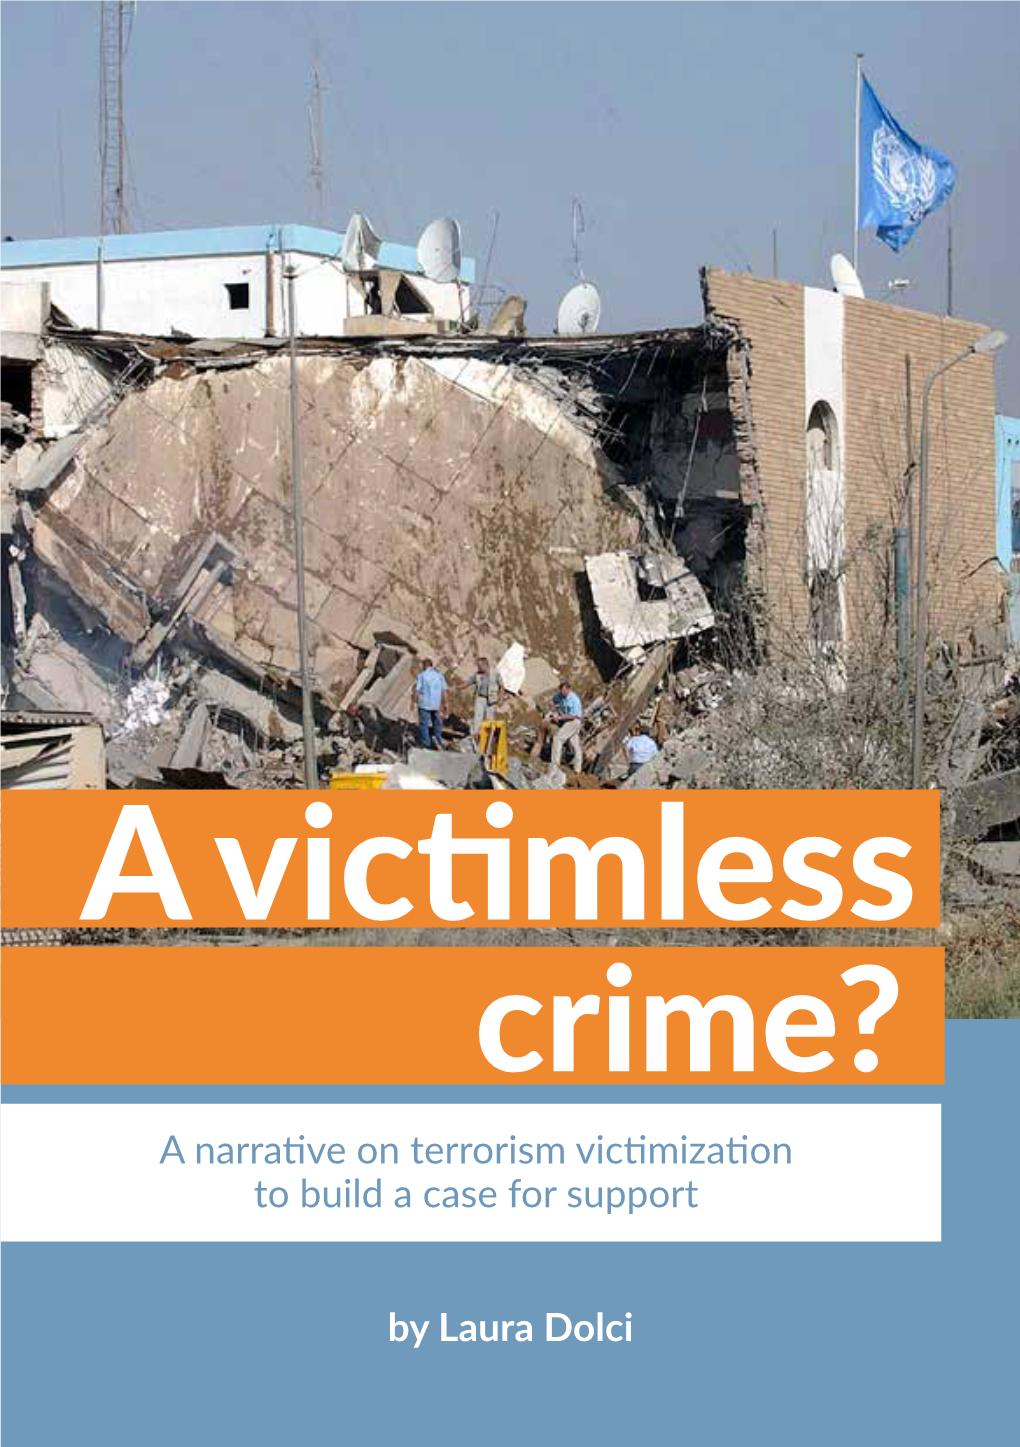 A Victimless Crime? a Narrative on Terrorism Victimization to Build a Case for Support